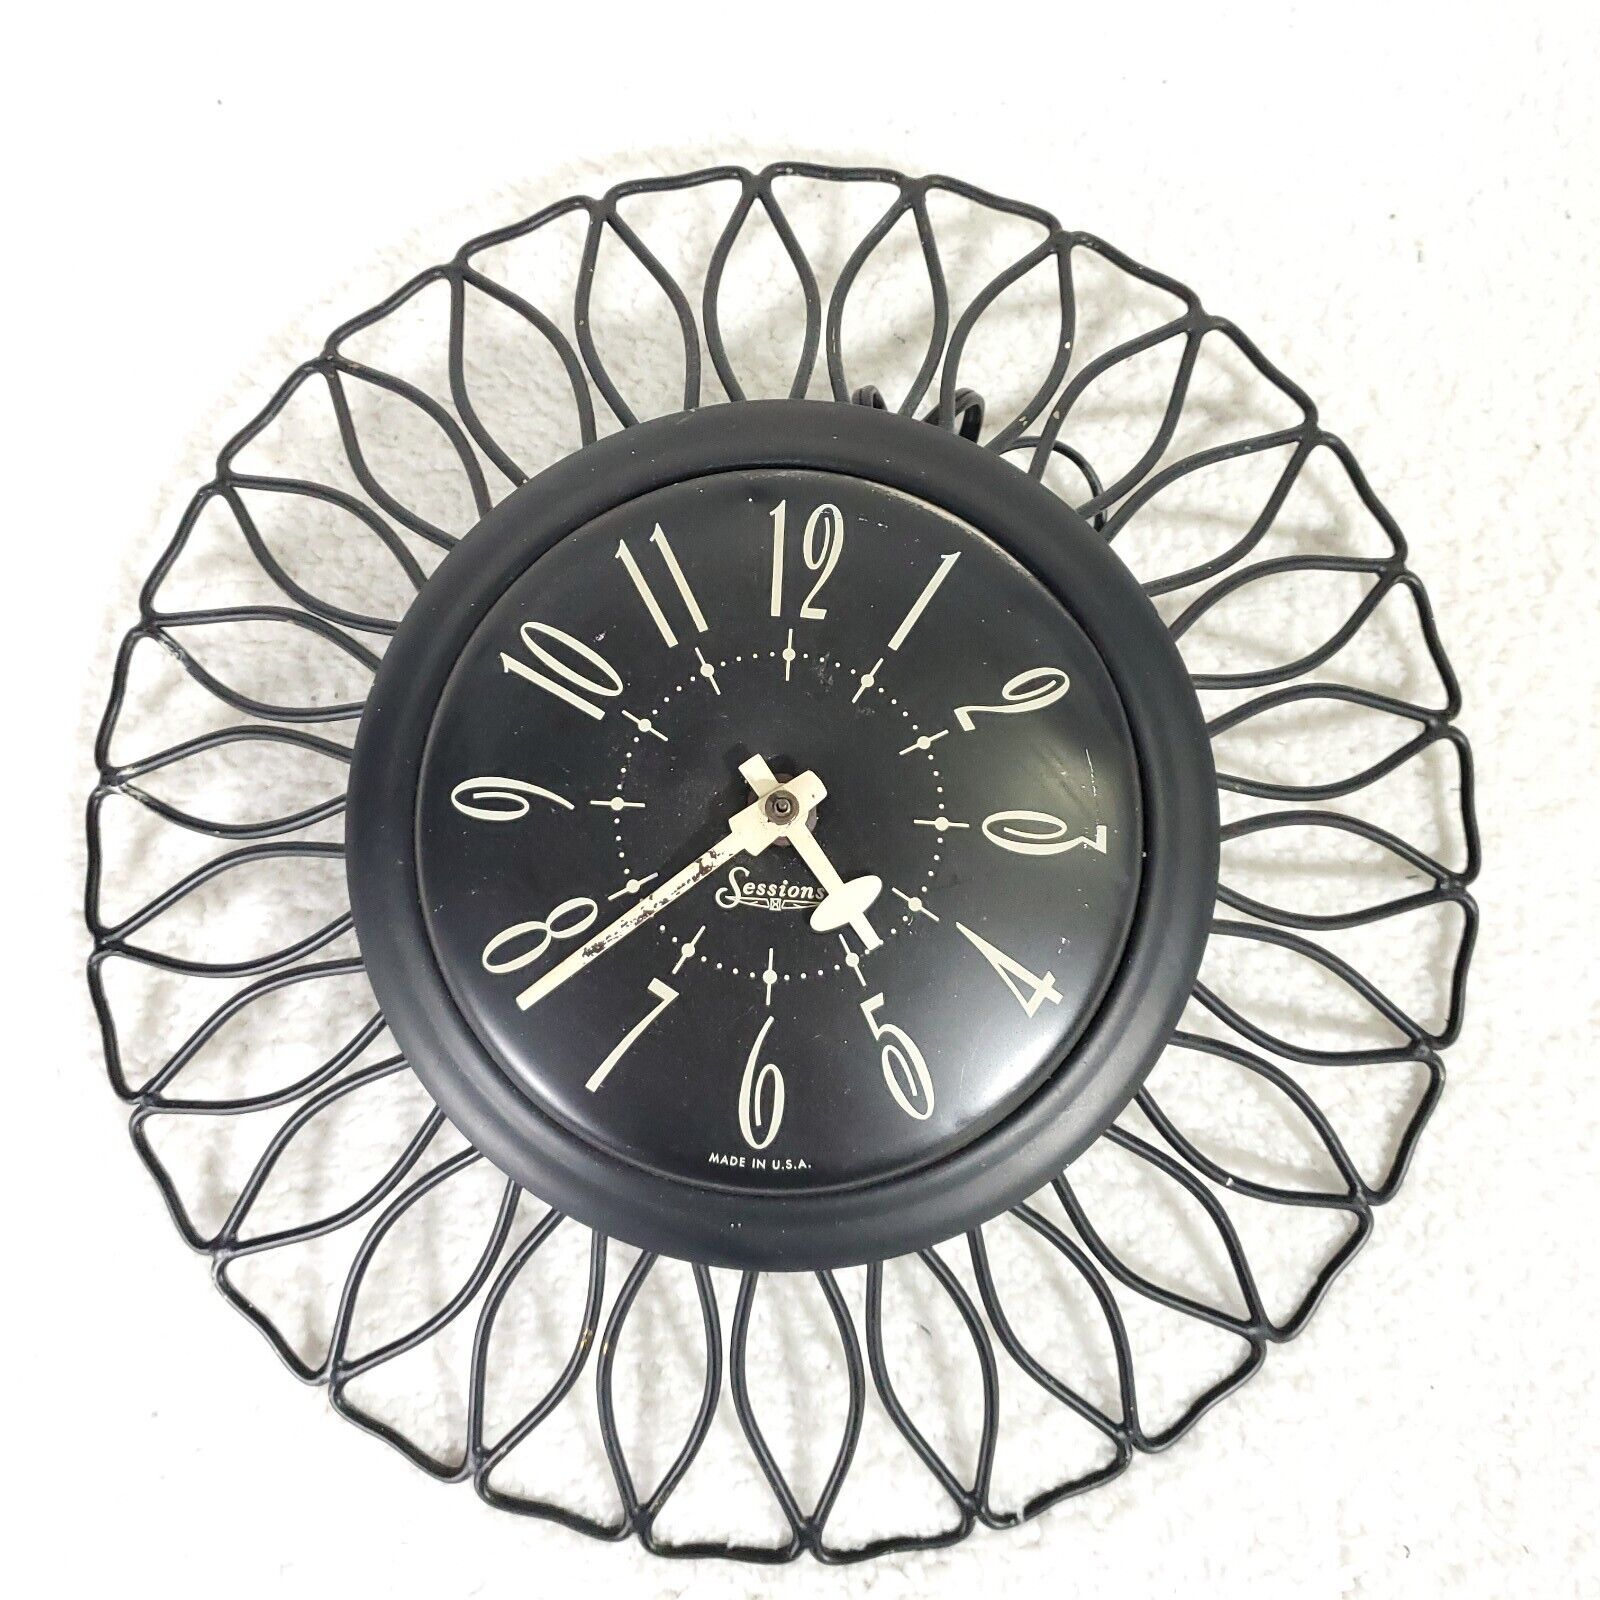 Sessions Electric Round Black Wall Clock. Working 